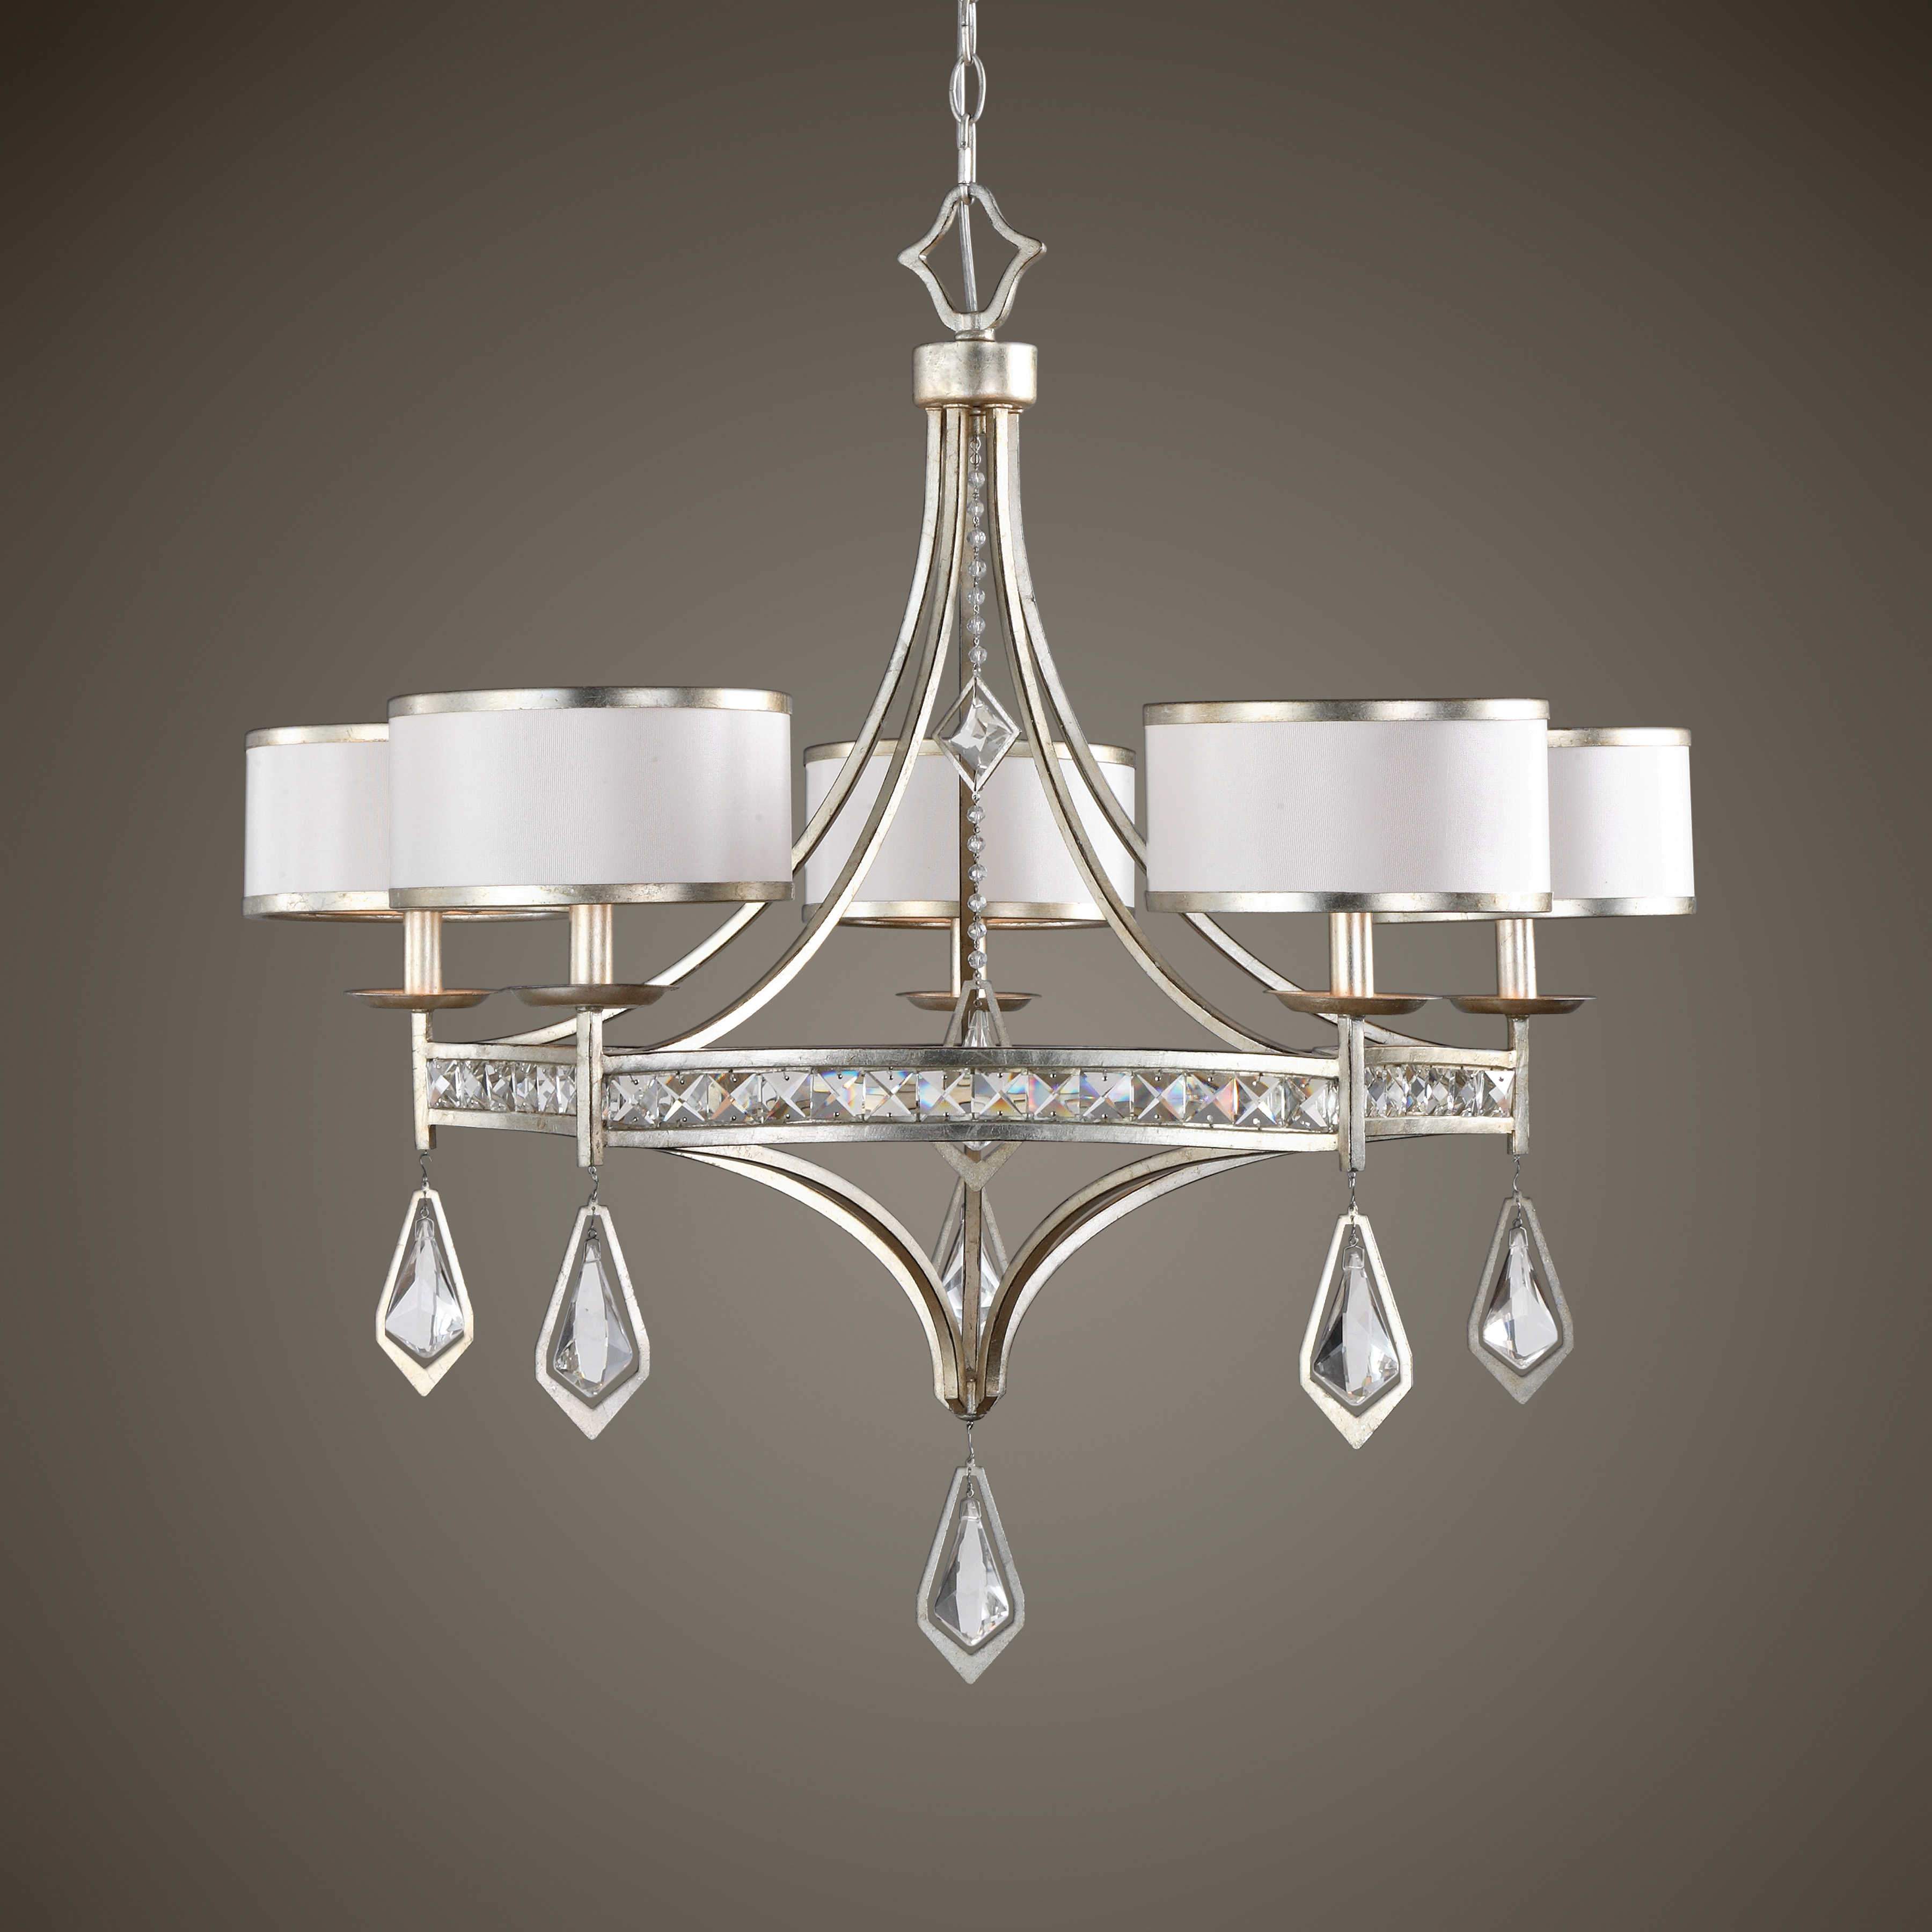 Uttermost Lighting Motor Freight - Rate to be Quoted Uttermost Tamworth, 5 Lt. Chandelier - Shipping December